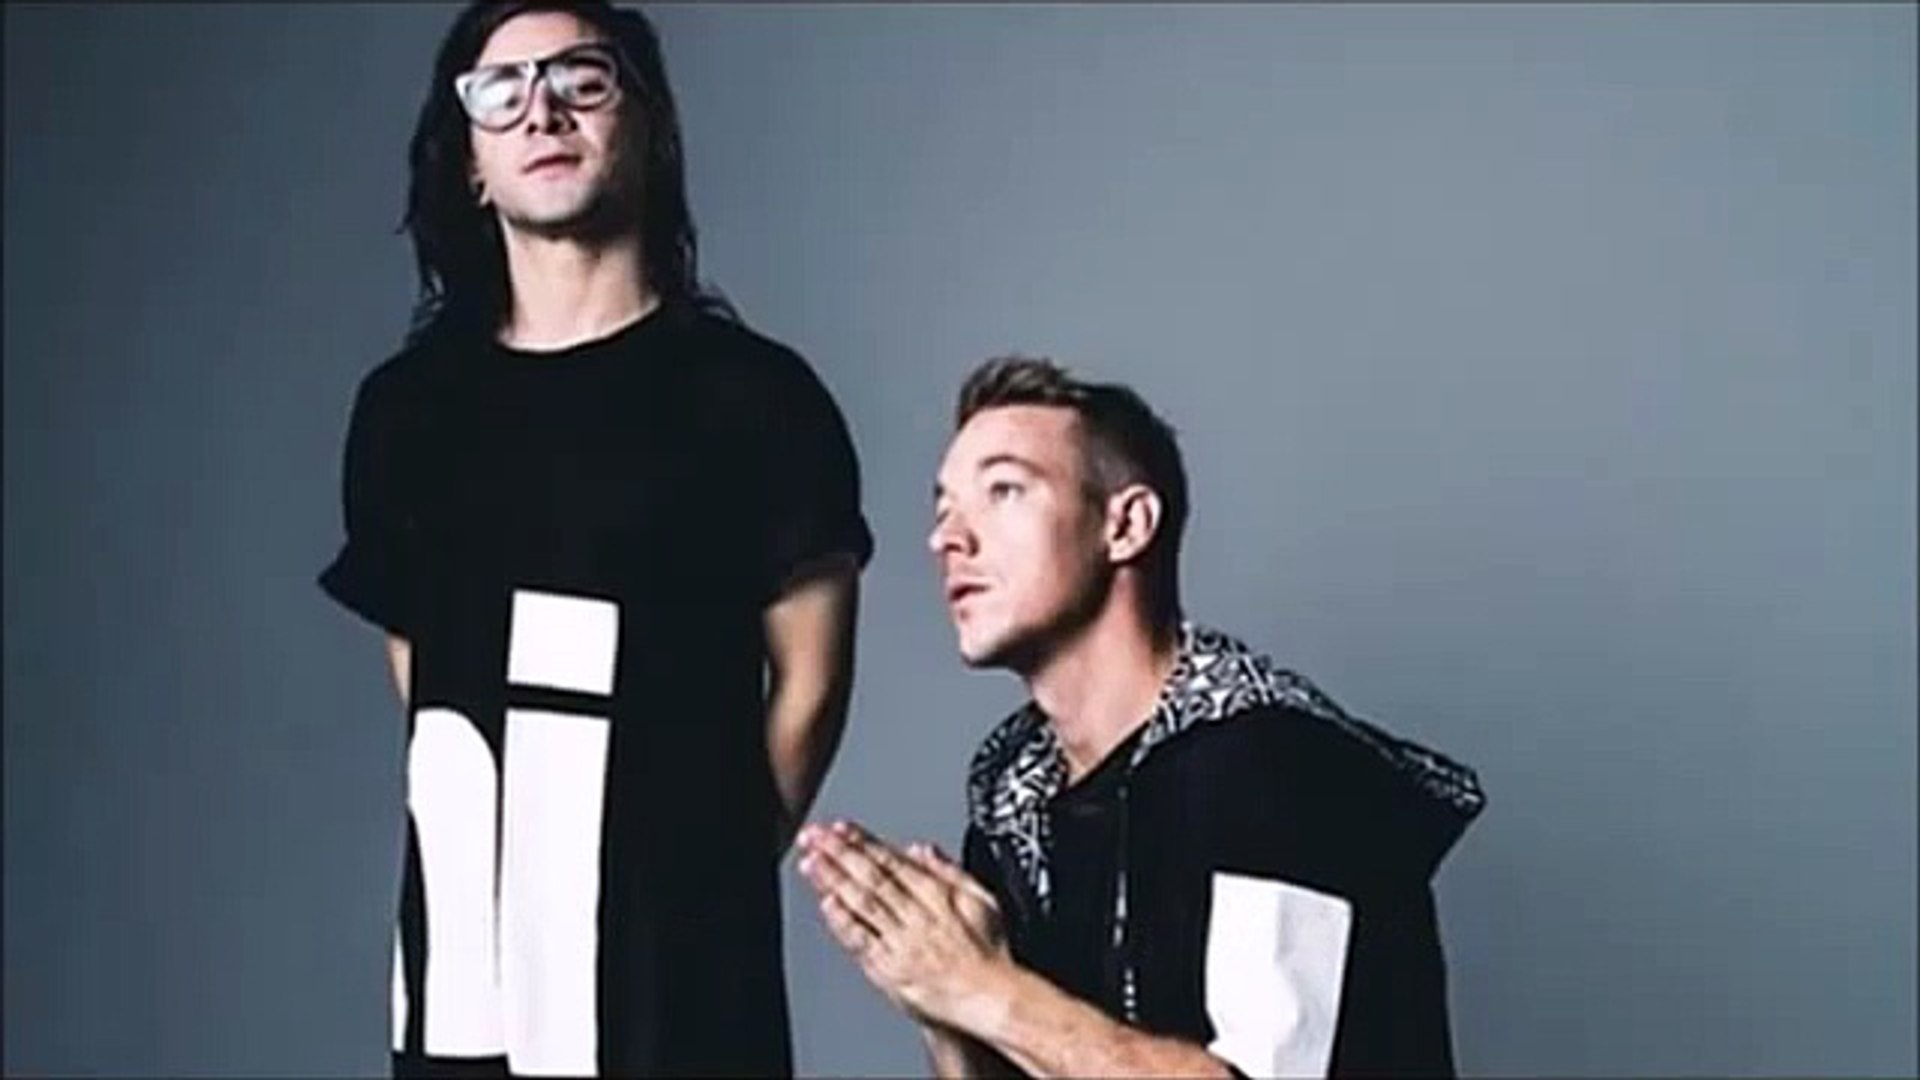 Skrillex and Diplo - Where Are Ü Now with Justin Bieber (All Artwork  Slowed) - video Dailymotion